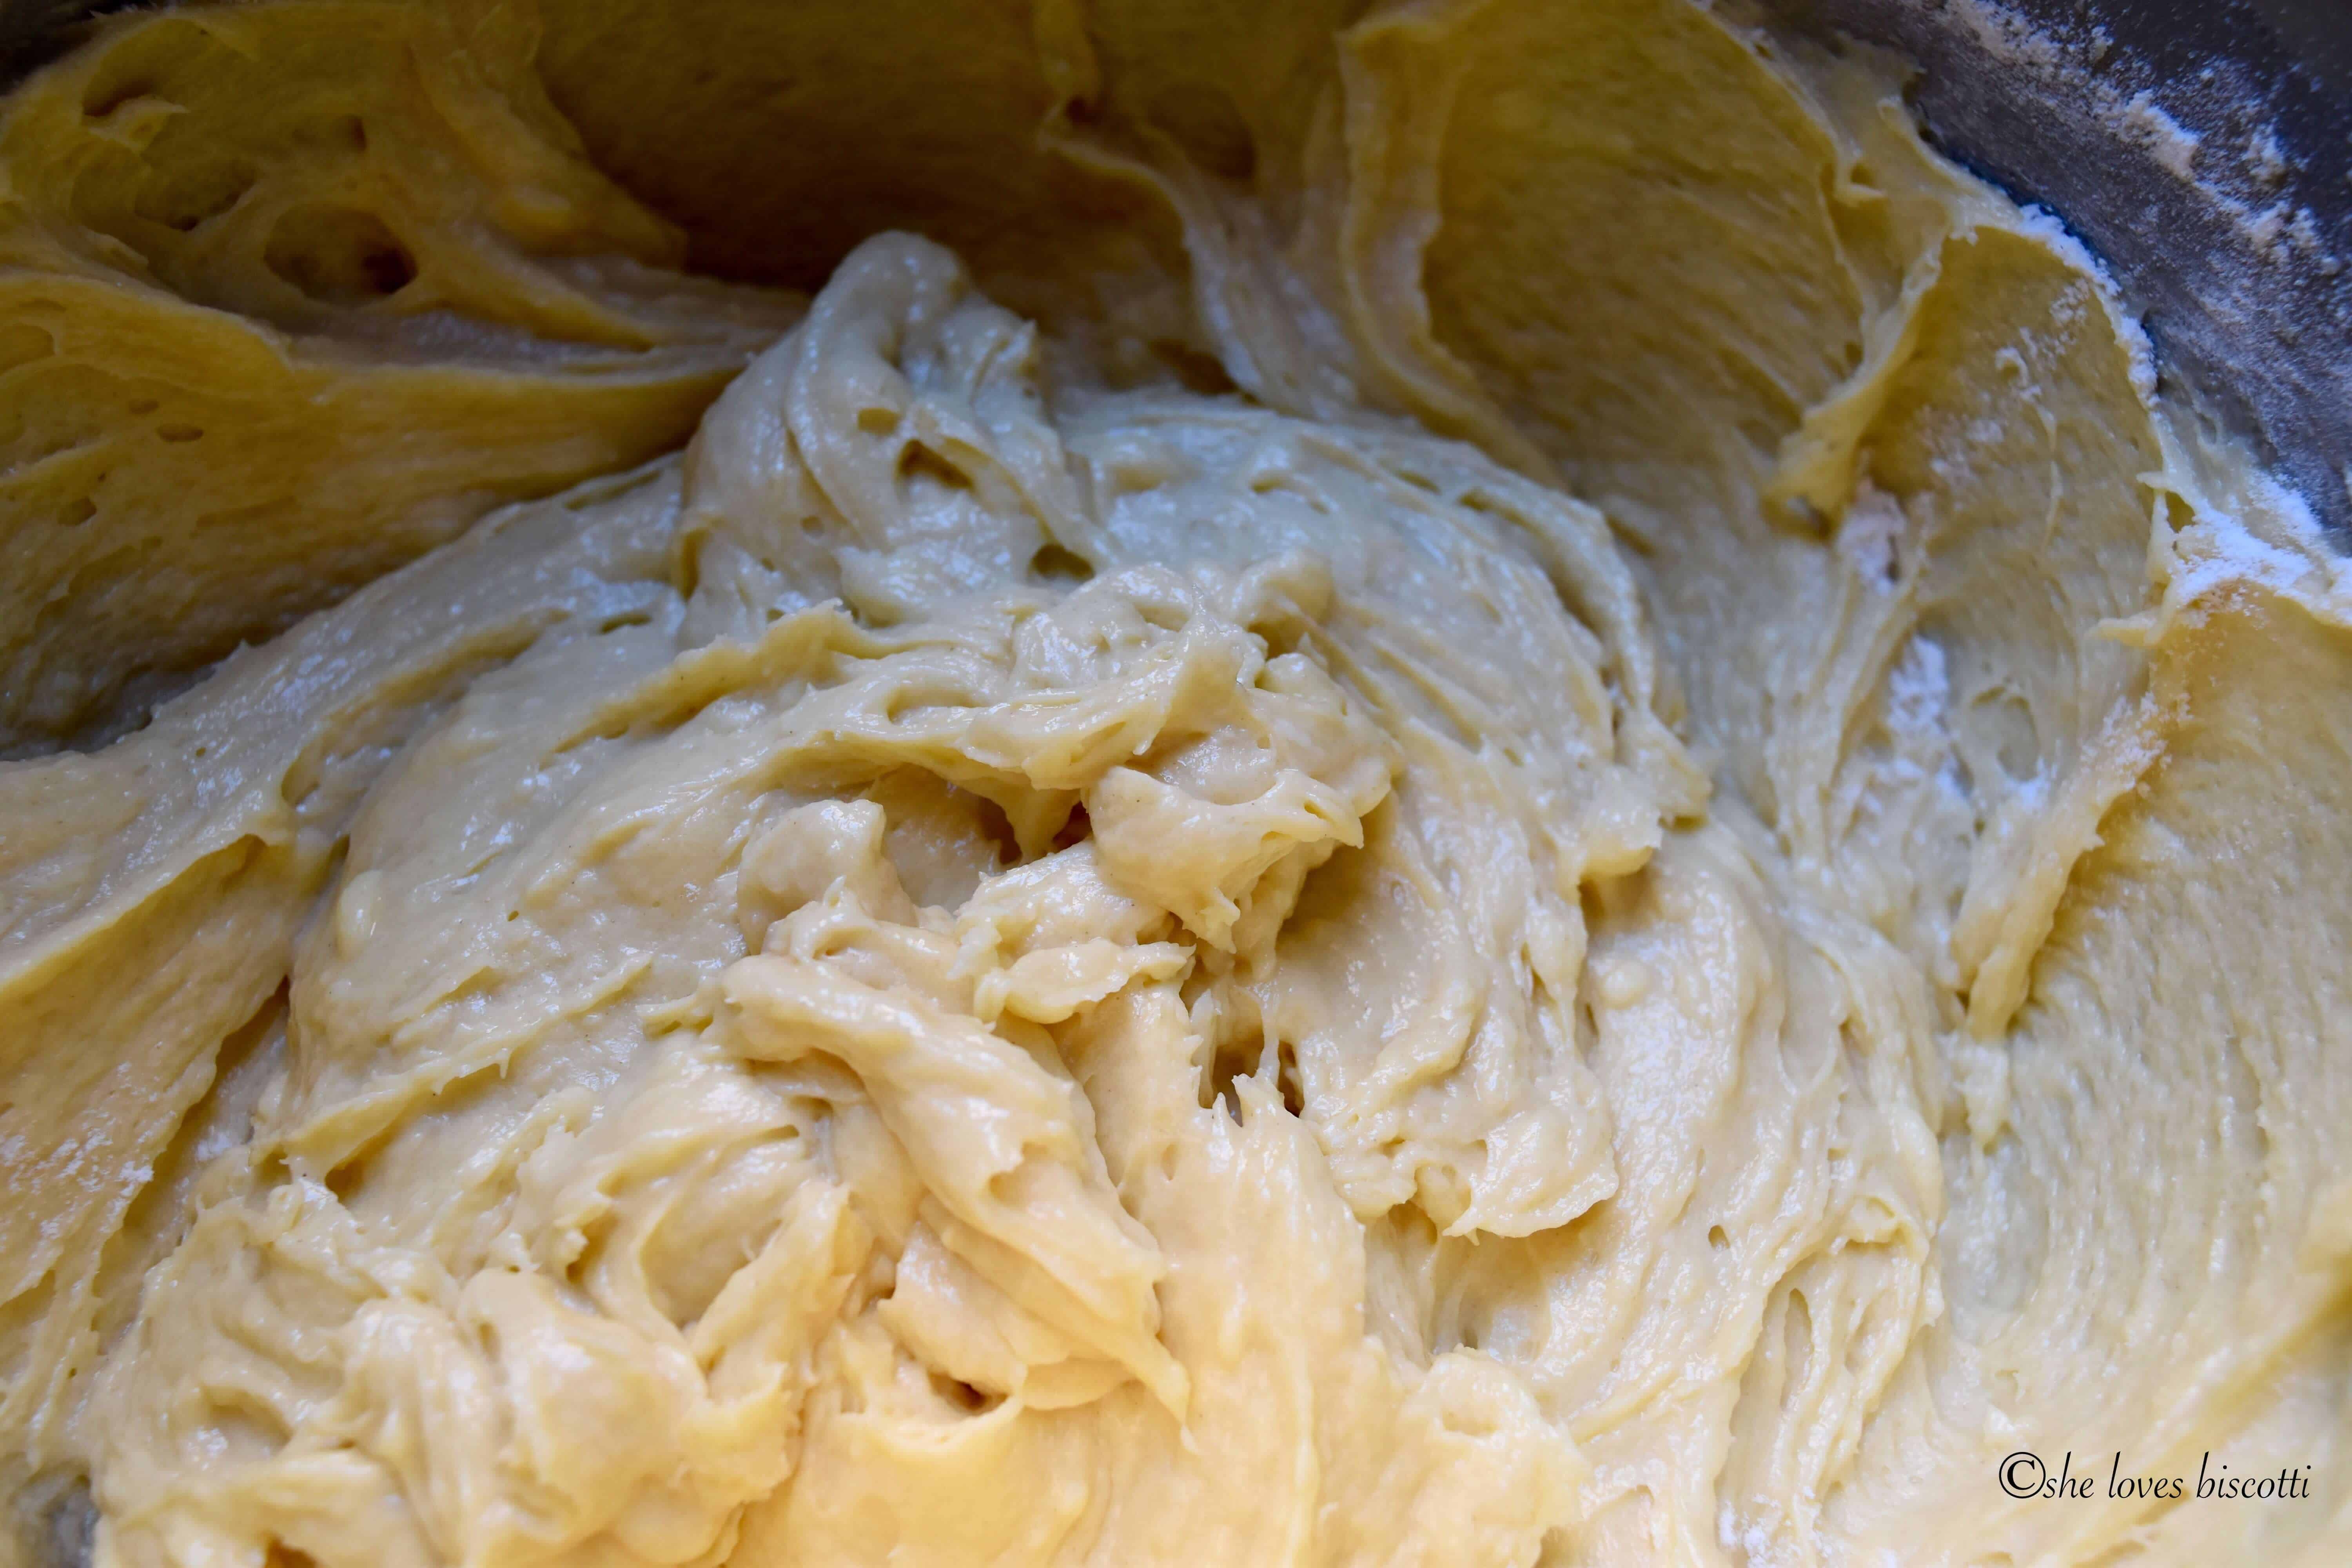 A close up shot of the cookie dough.